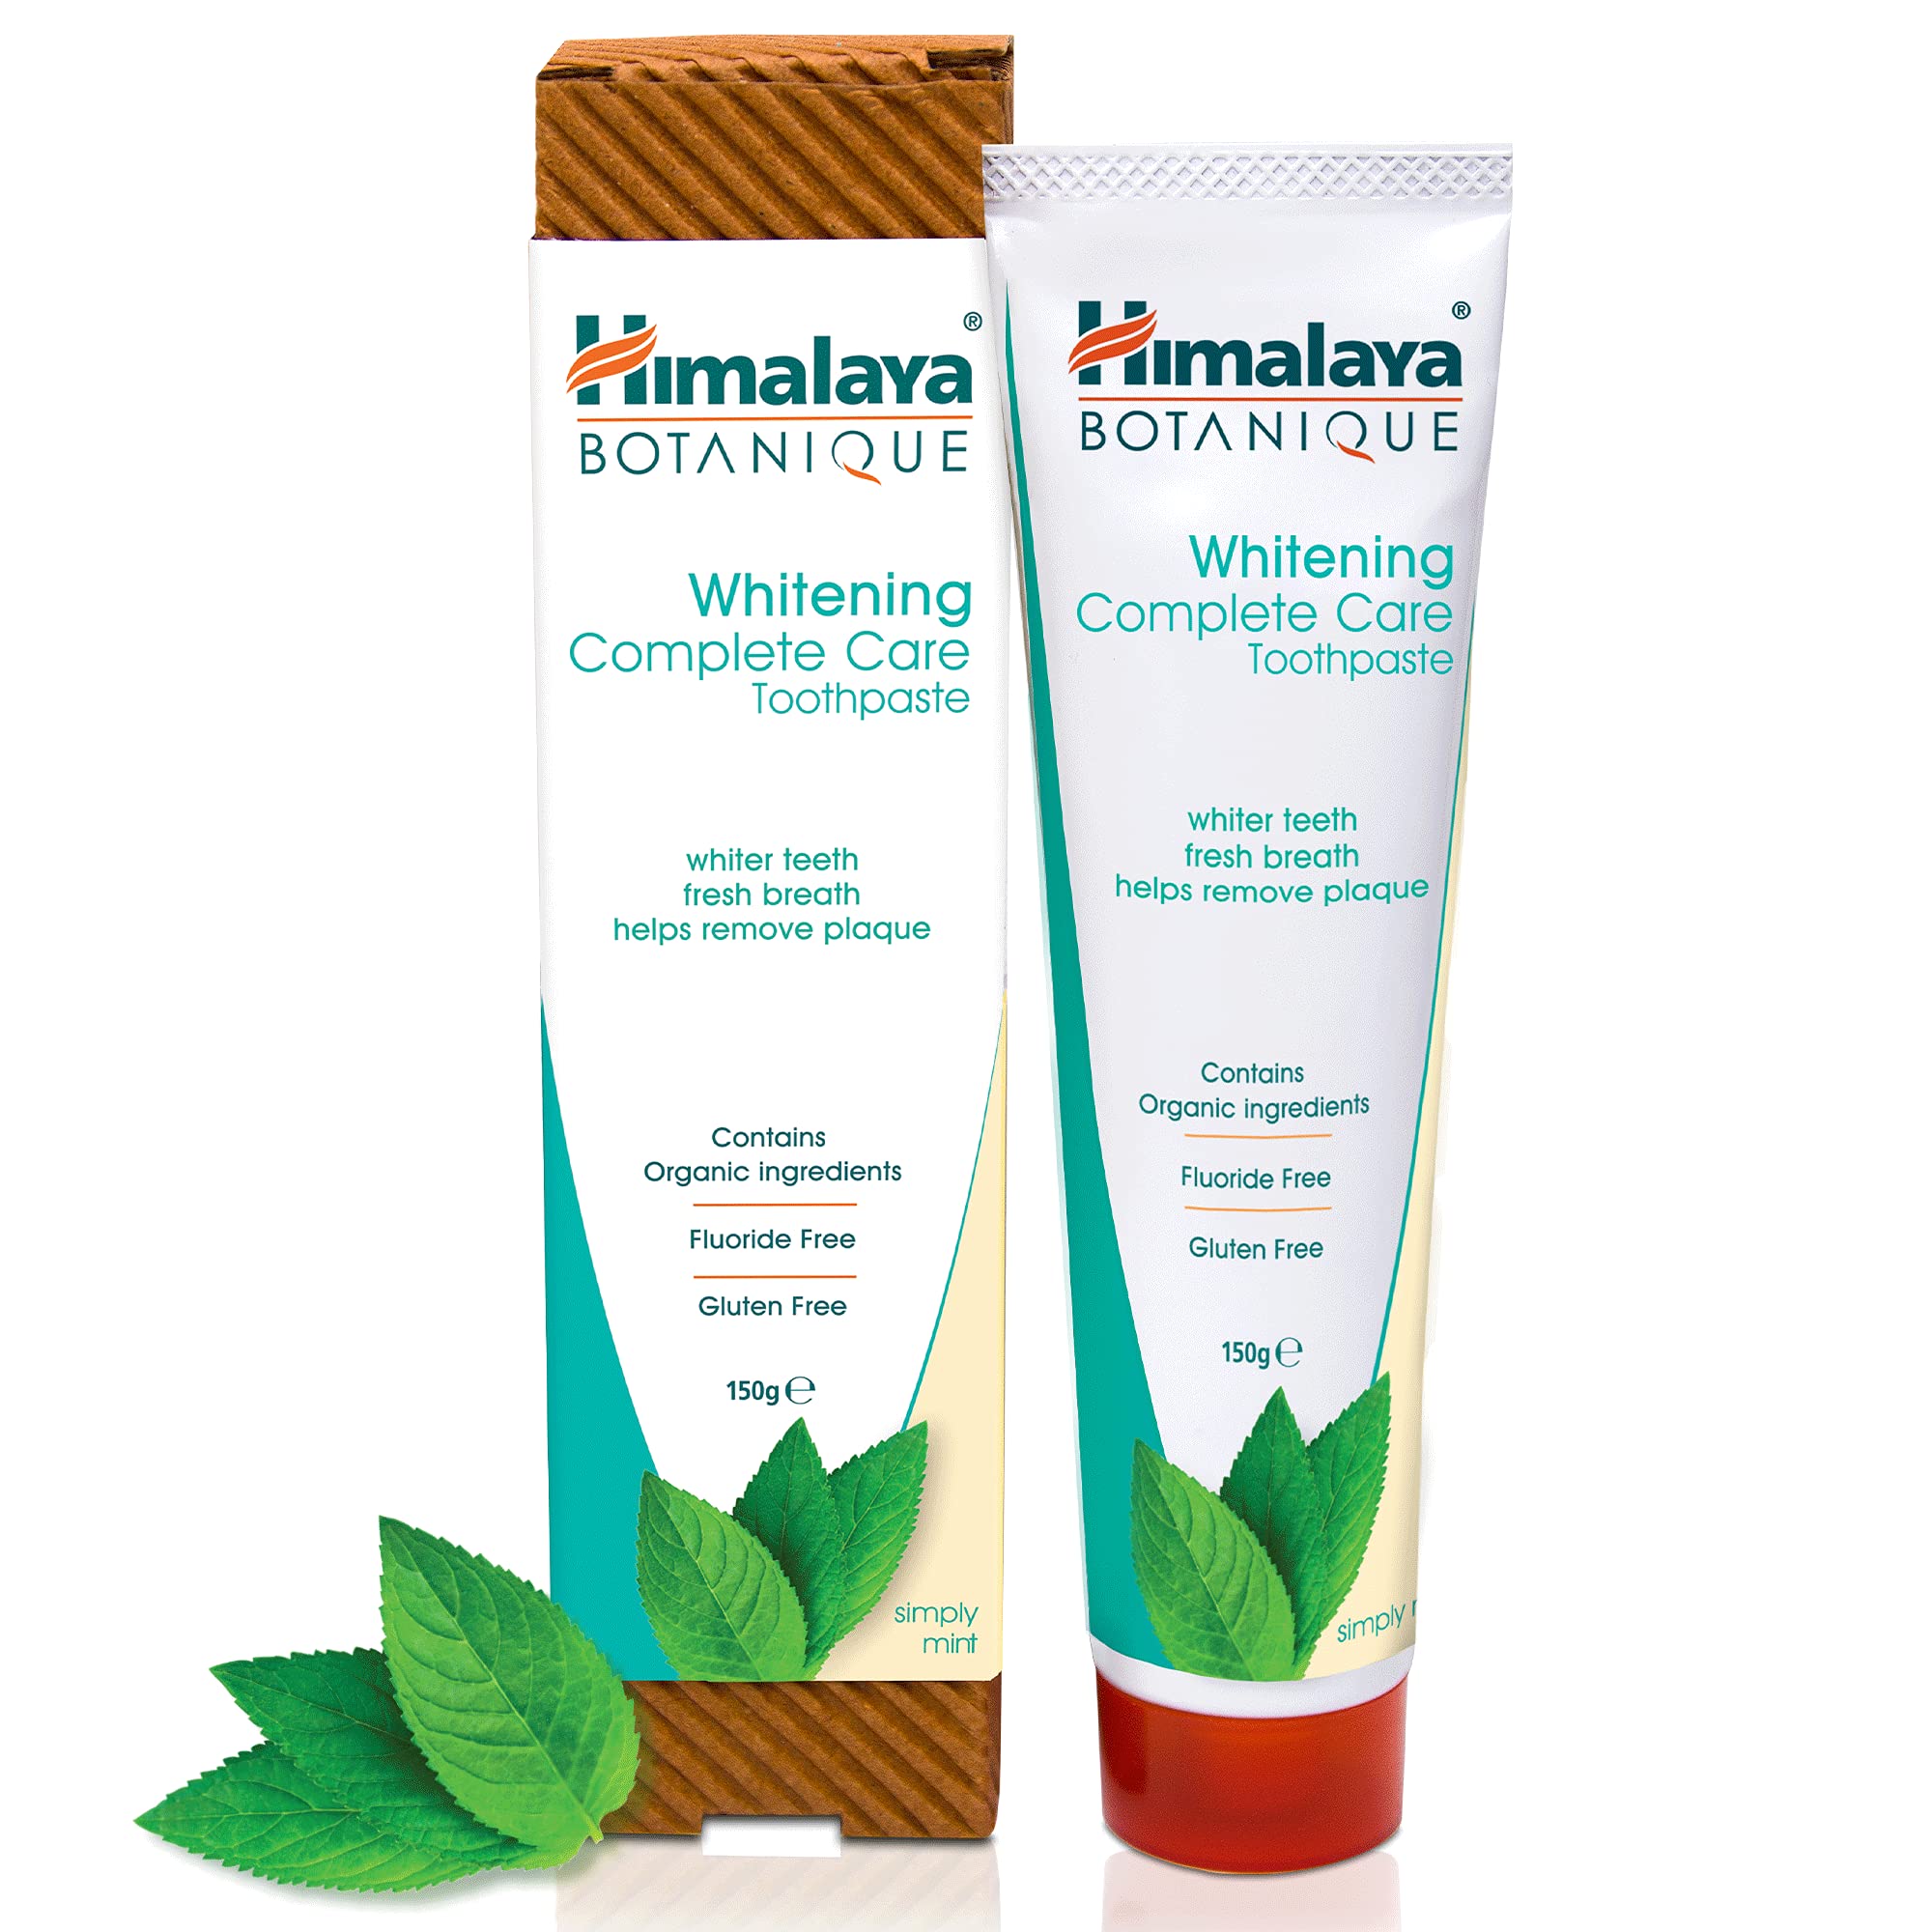 Himalaya Botanique Whitening Complete Care Toothpaste, Teeth Whitening, Fights Plaque, Fluoride Free, No Artificial Flavors, SLS Free, Cruelty Free, Simply Mint Flavor, 5.29 Oz, 4 Pack